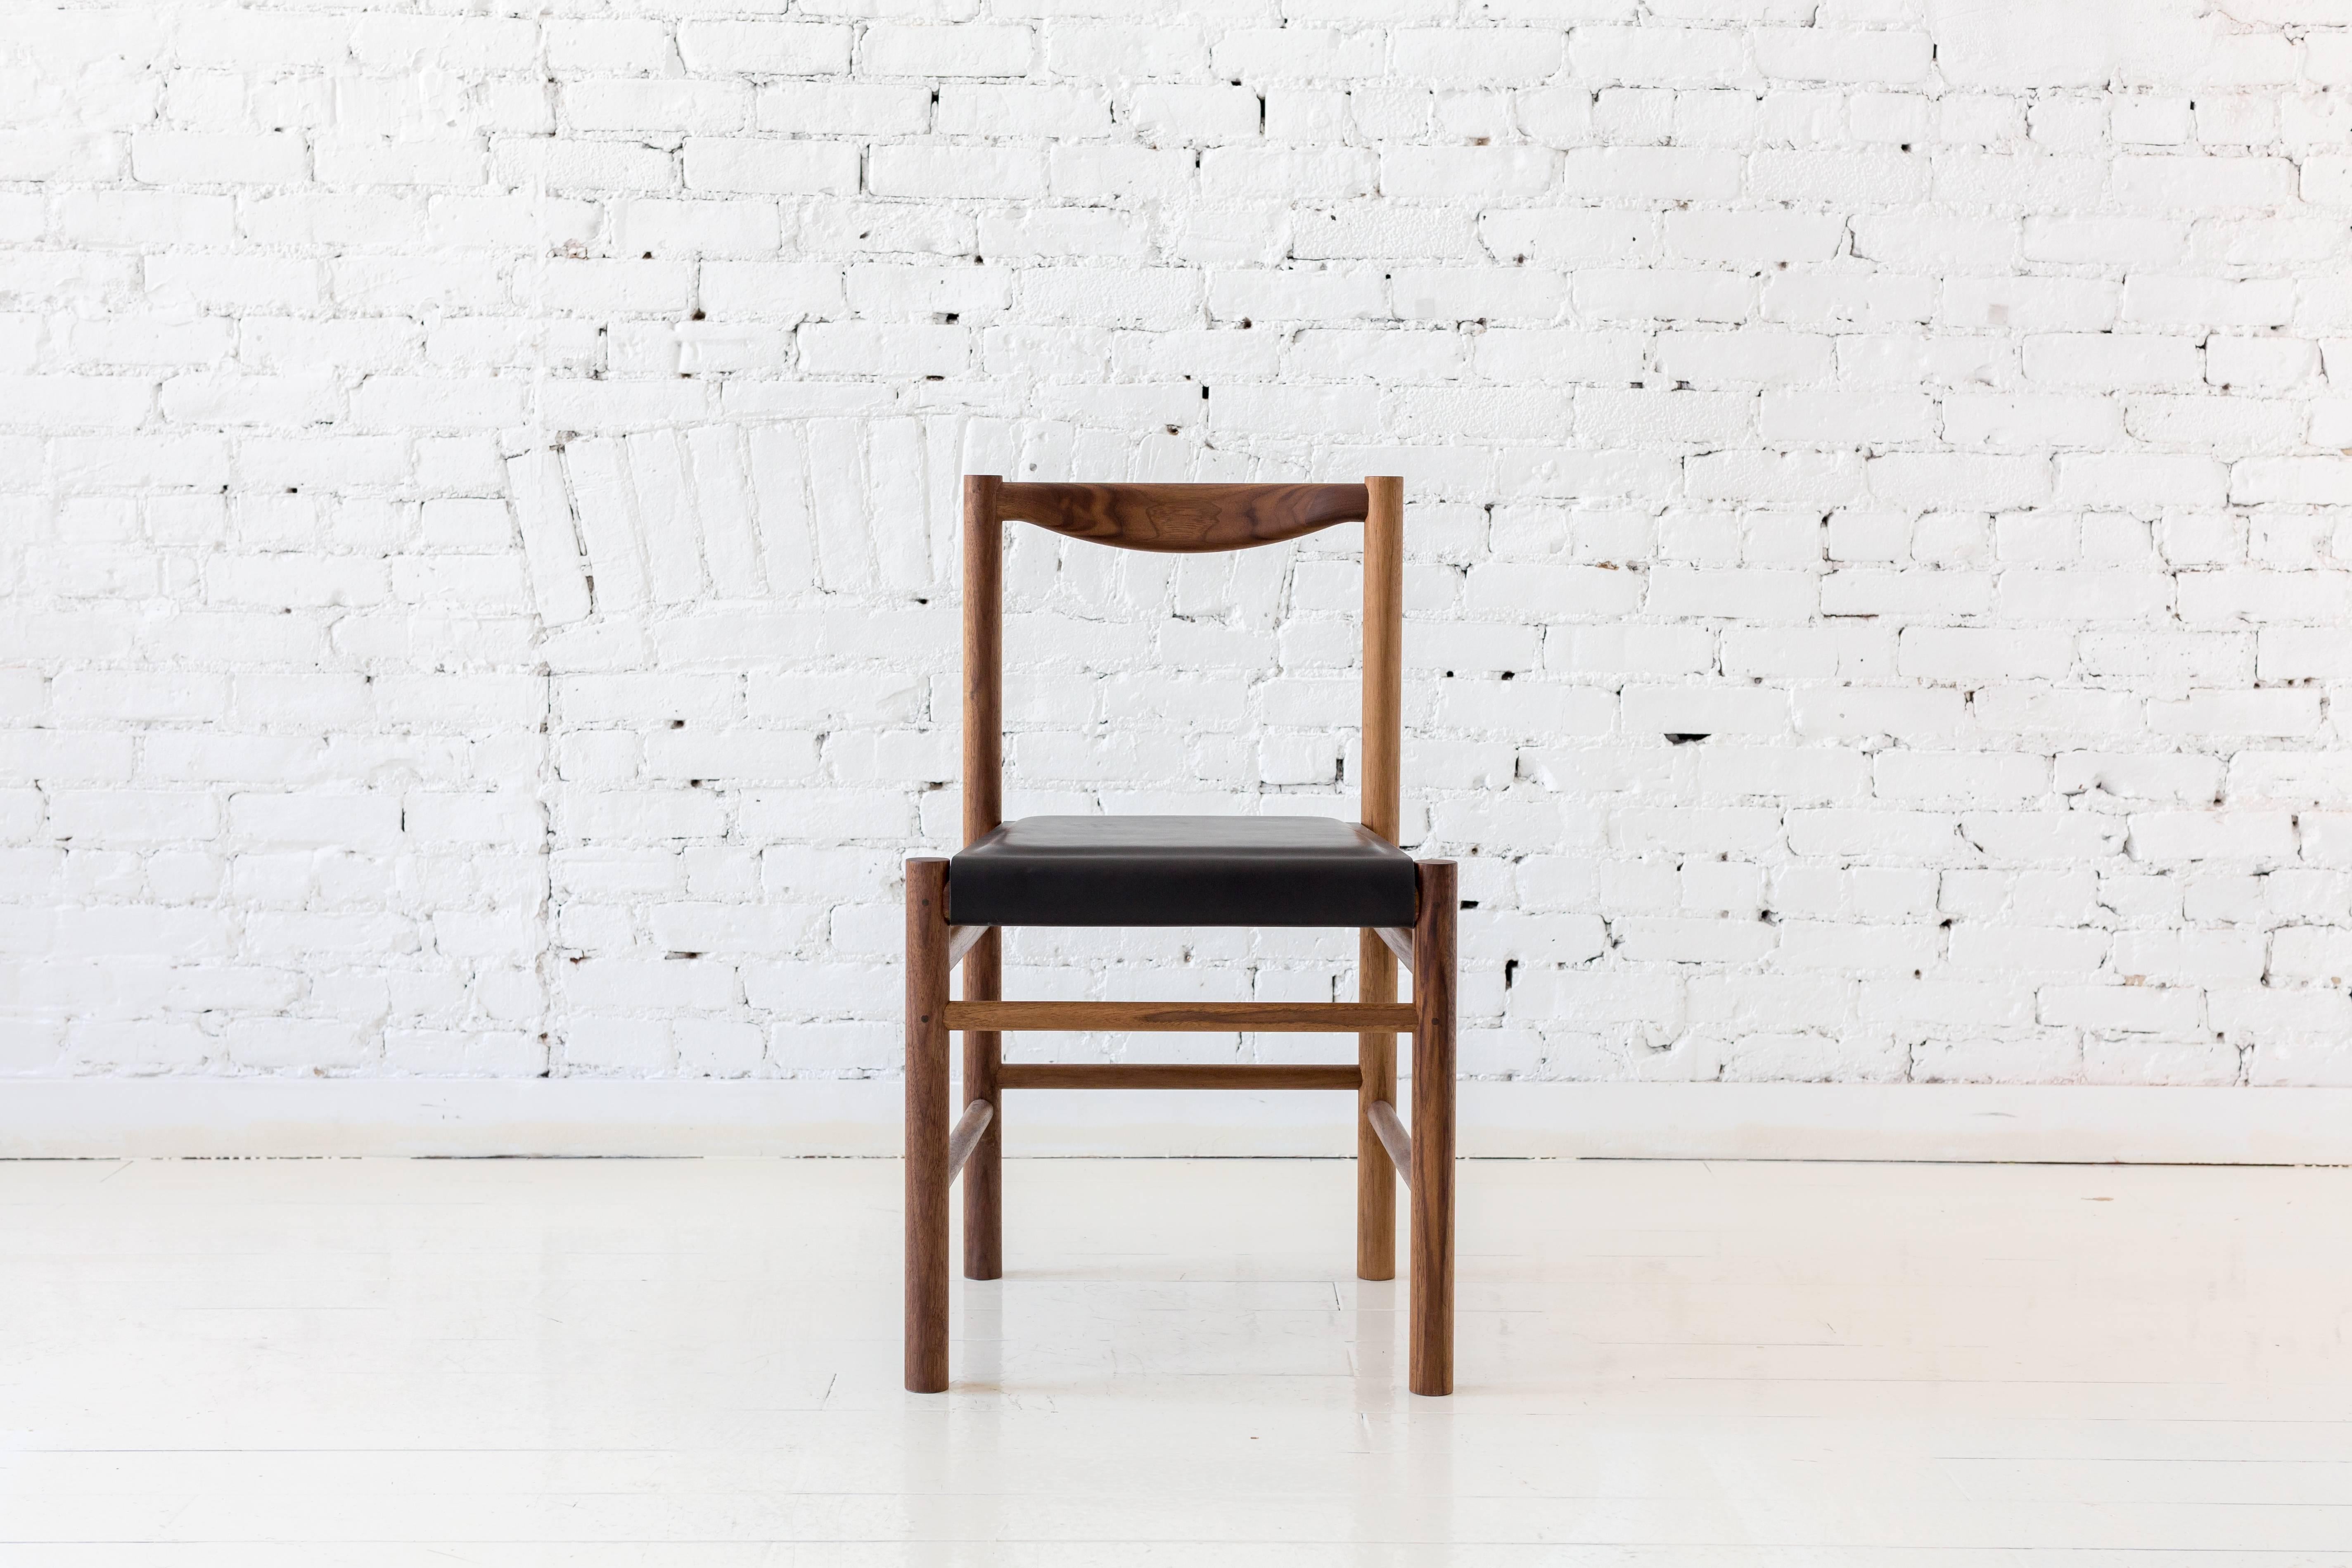 Shaker inspired walnut side chair with comfortable contoured back rest. This chair's simplicity makes it versatile to work well in many different environments.

Also available:
- Hard maple chair with plain seat pan
- Walnut chair with shearling